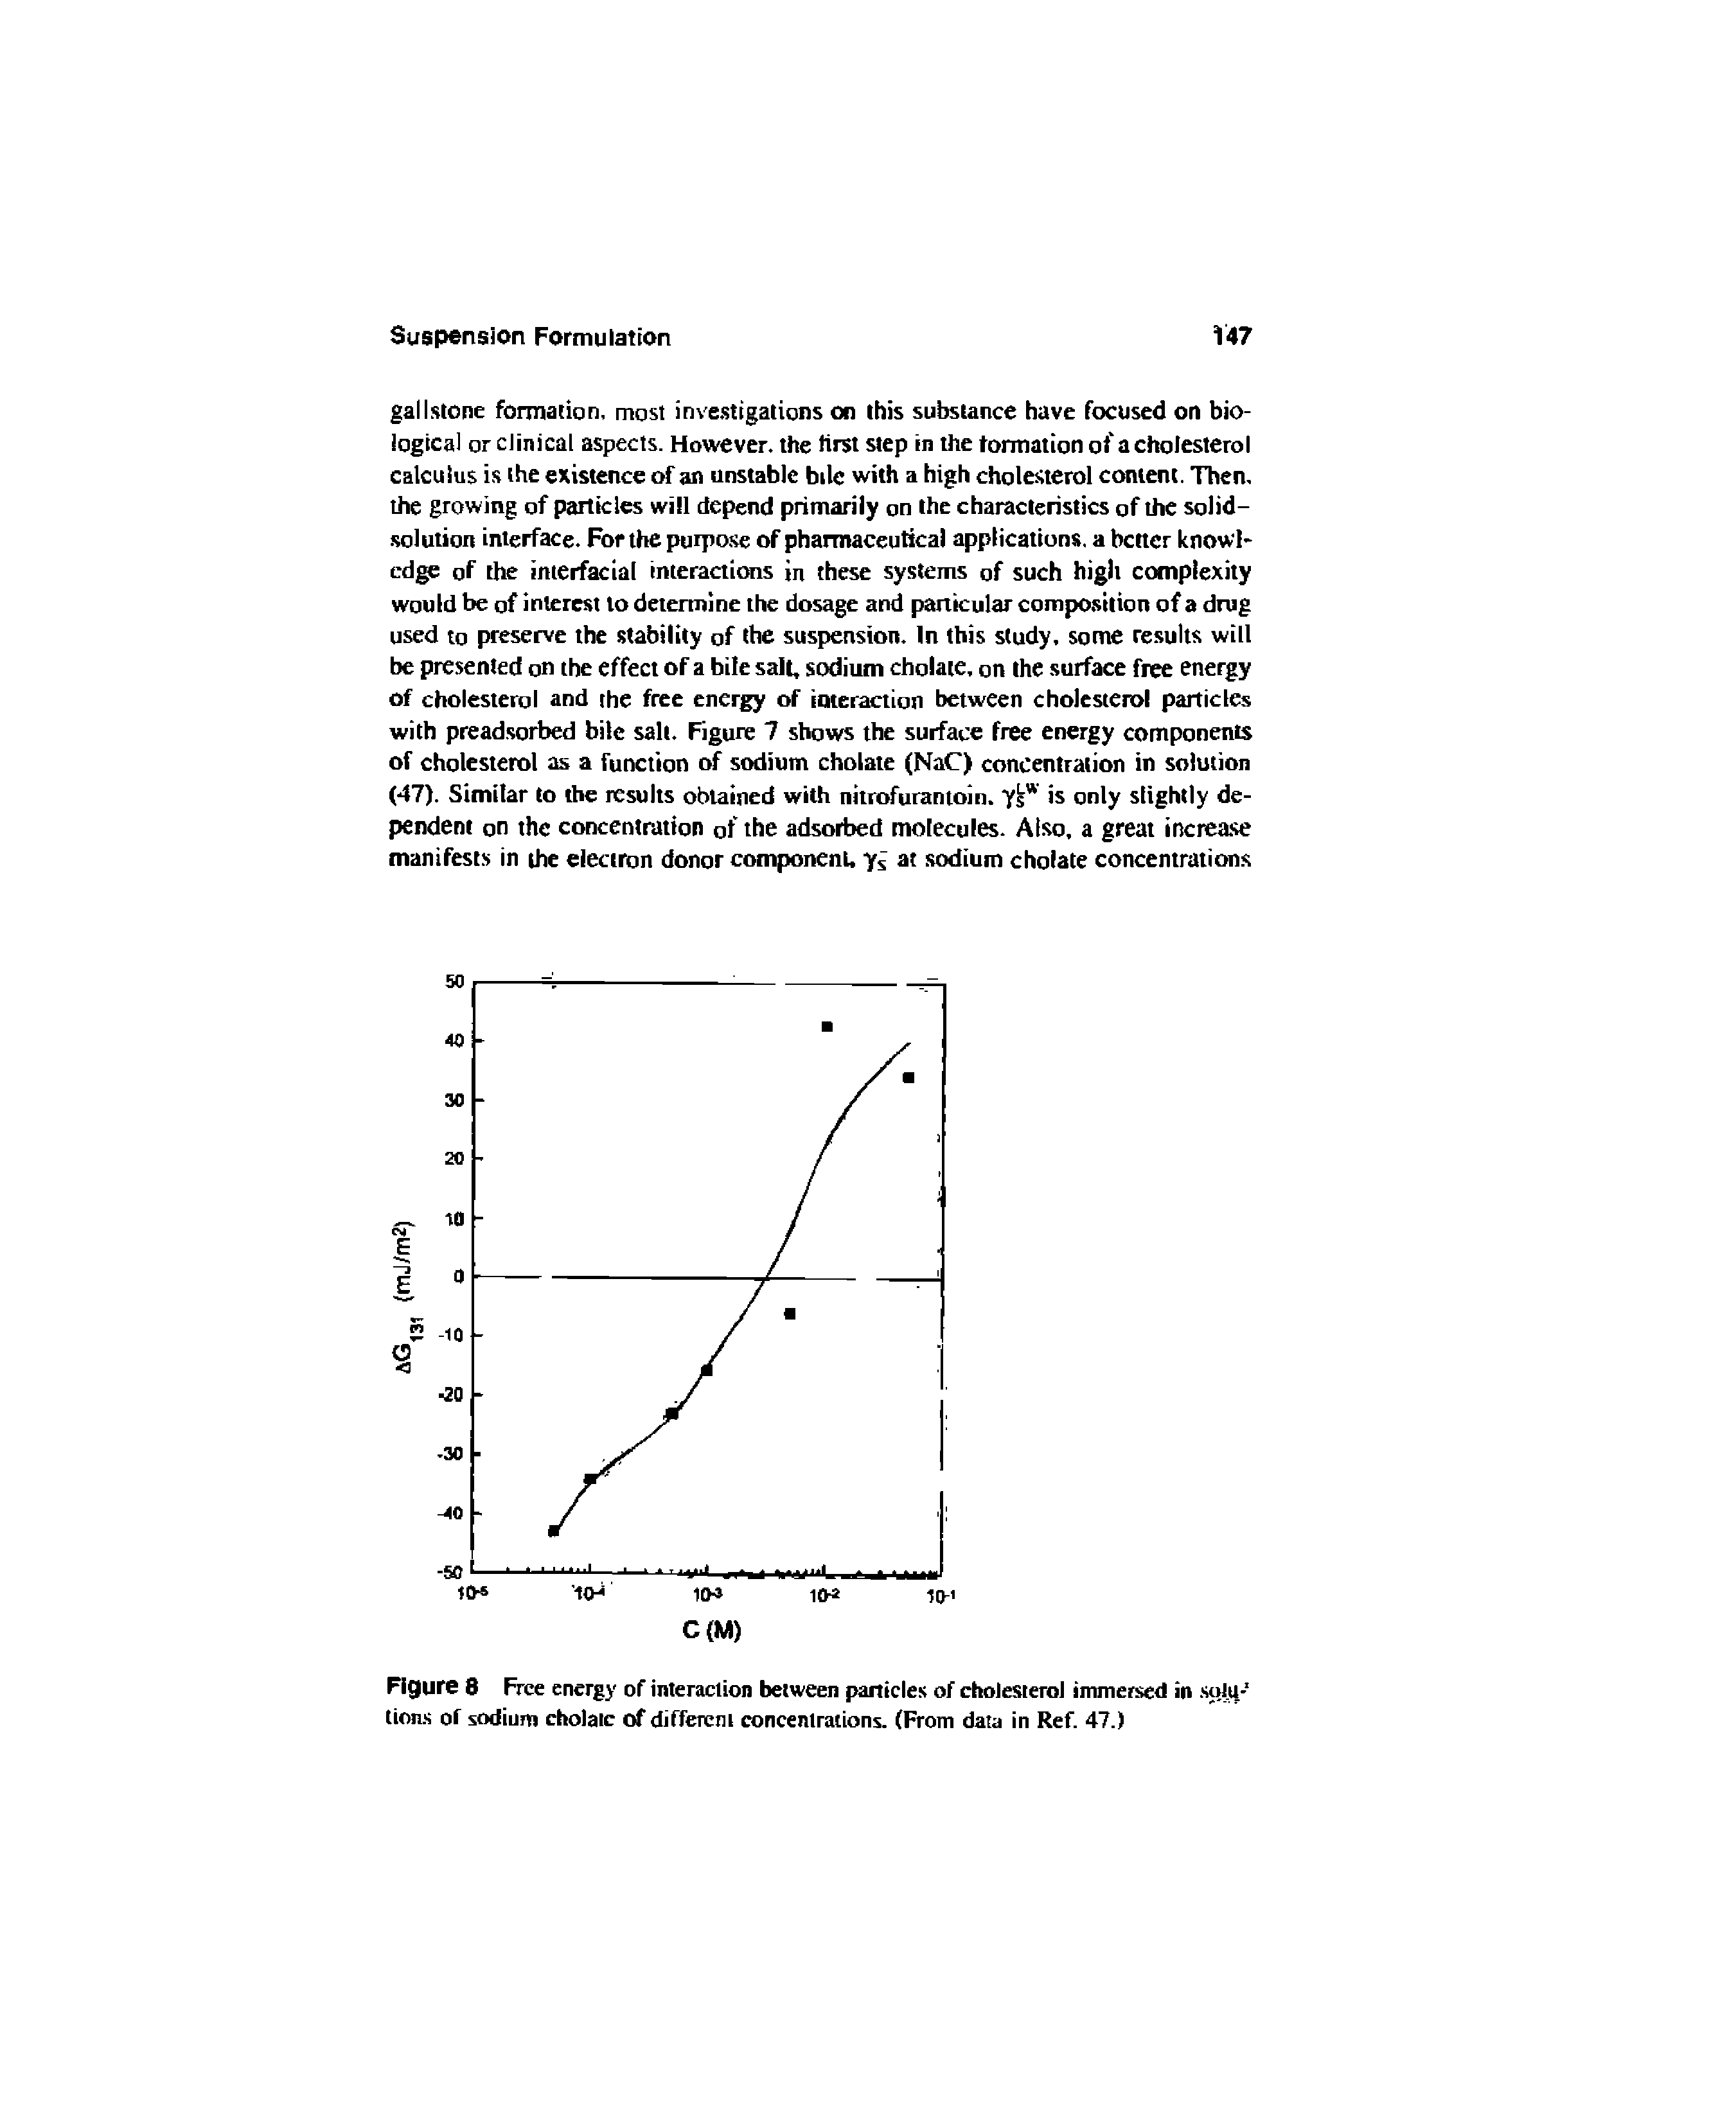 Figure 8 Free energy of interaction between particles of chotesierol immetsed in sut. tion.s of sodium cholaic of differem concentrations. (From data in Ref. 47.)...